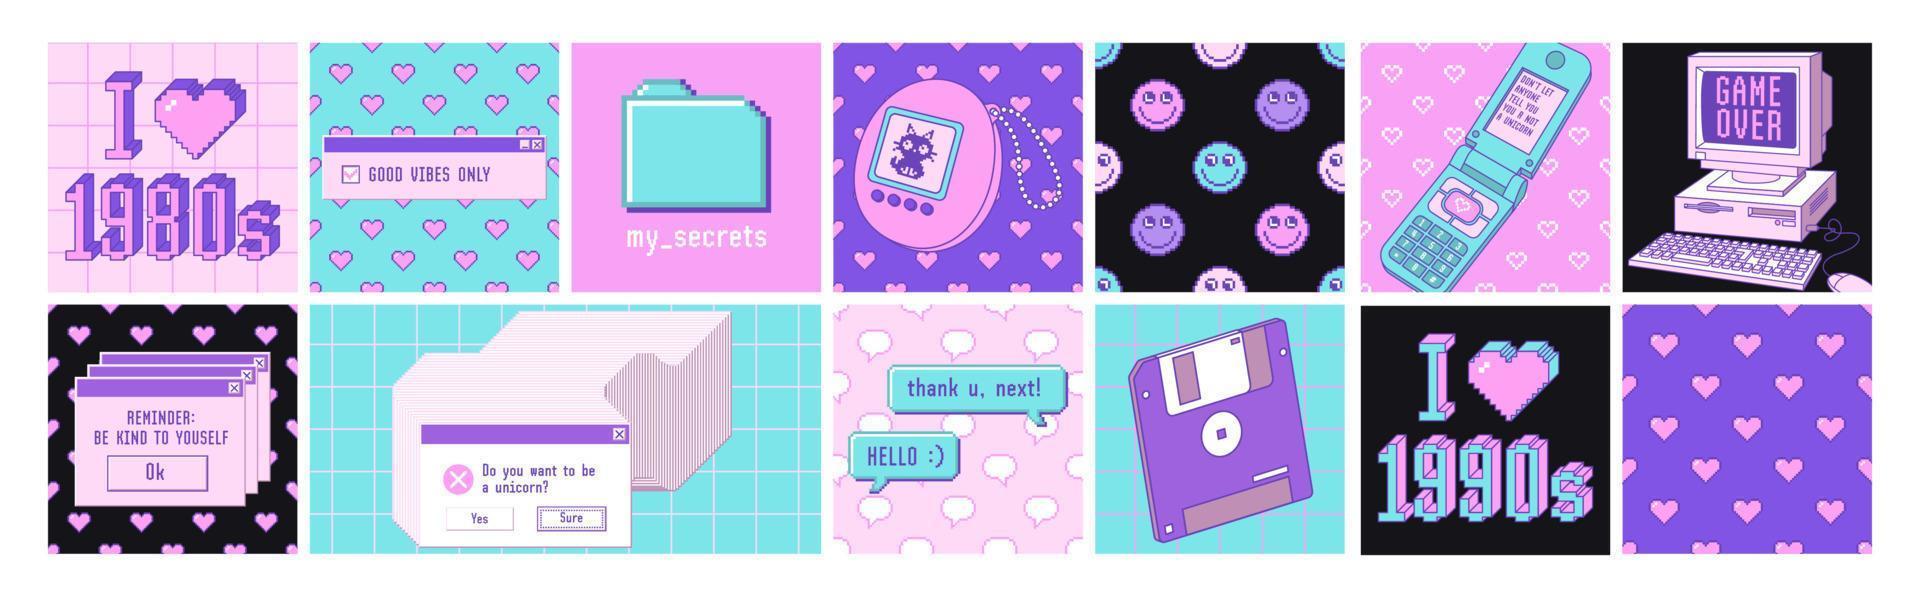 Old computer aesthetic 1980s -1990s. Square posters. Sticker pack with retro pc elements. vector